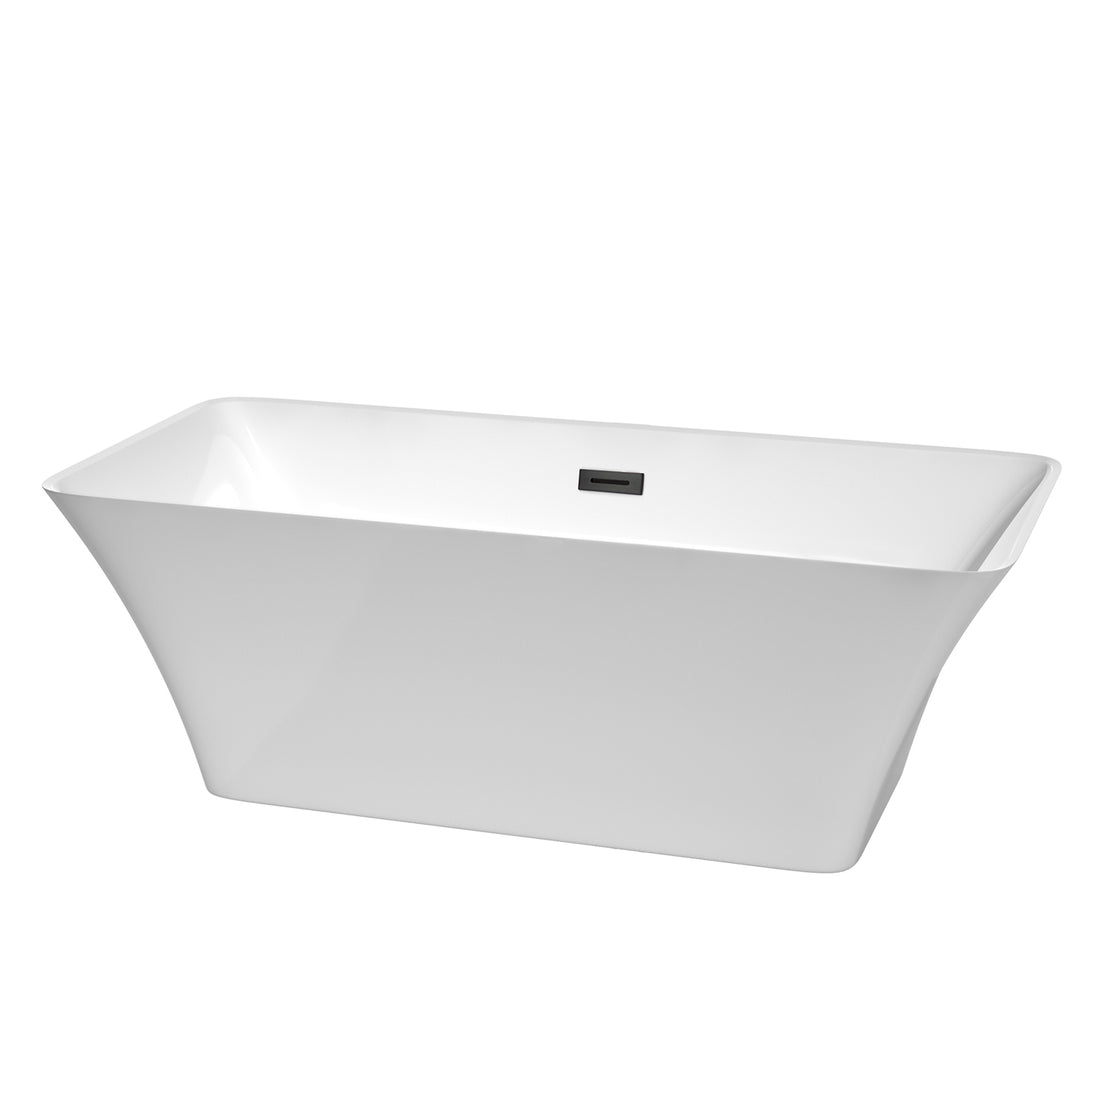 67&quot; Freestanding Bathtub in White with Matte Black Pop-up Drain and Overflow Trim Finish